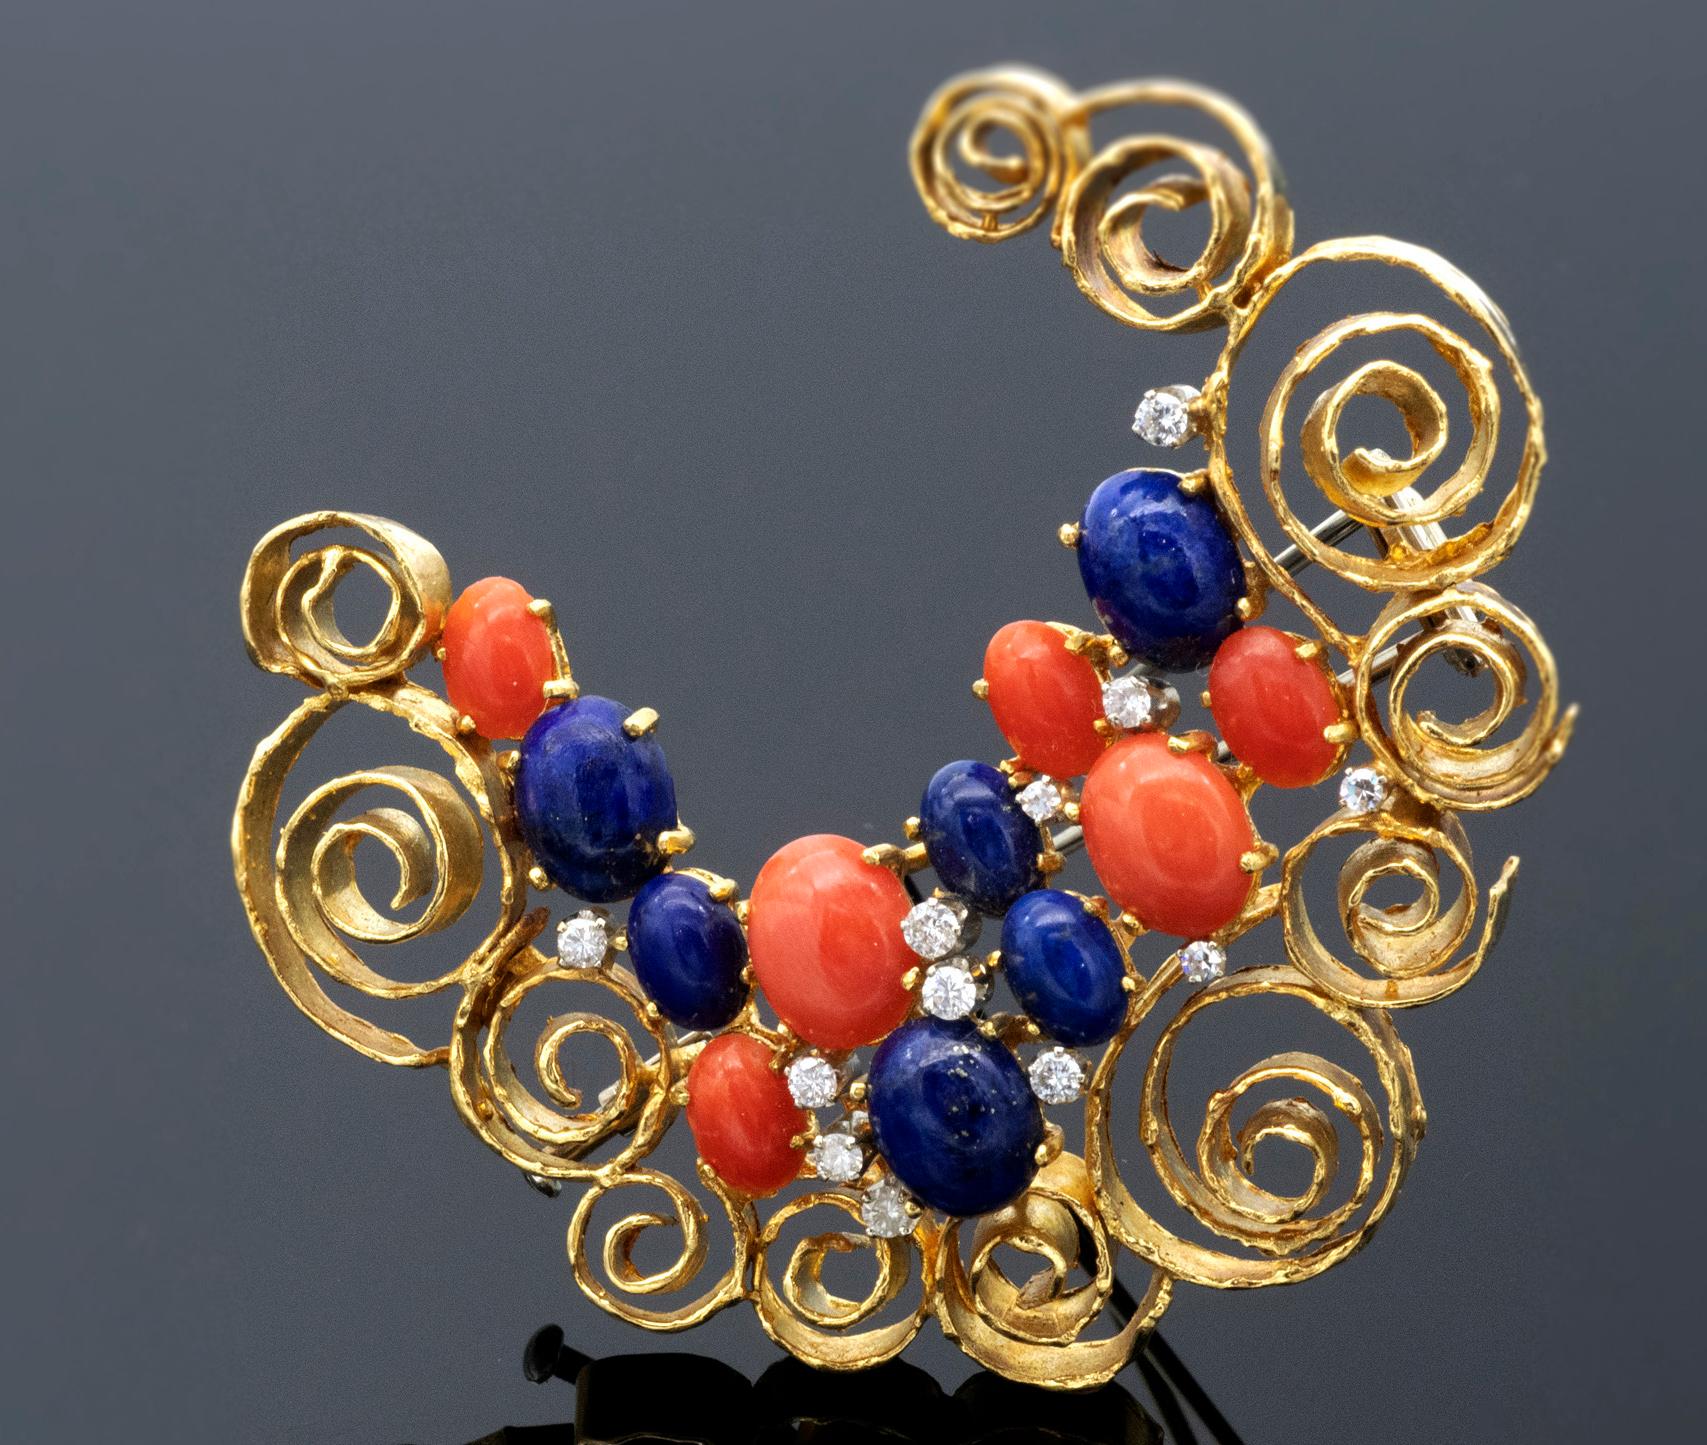 An original 1970s piece, this moon crescent designer brooch is a quintessential representation of the era's exuberant approach to jewelry design. Crafted from textured 18 karat gold, its intricate swirls evoke a filigree-like airiness that speaks to